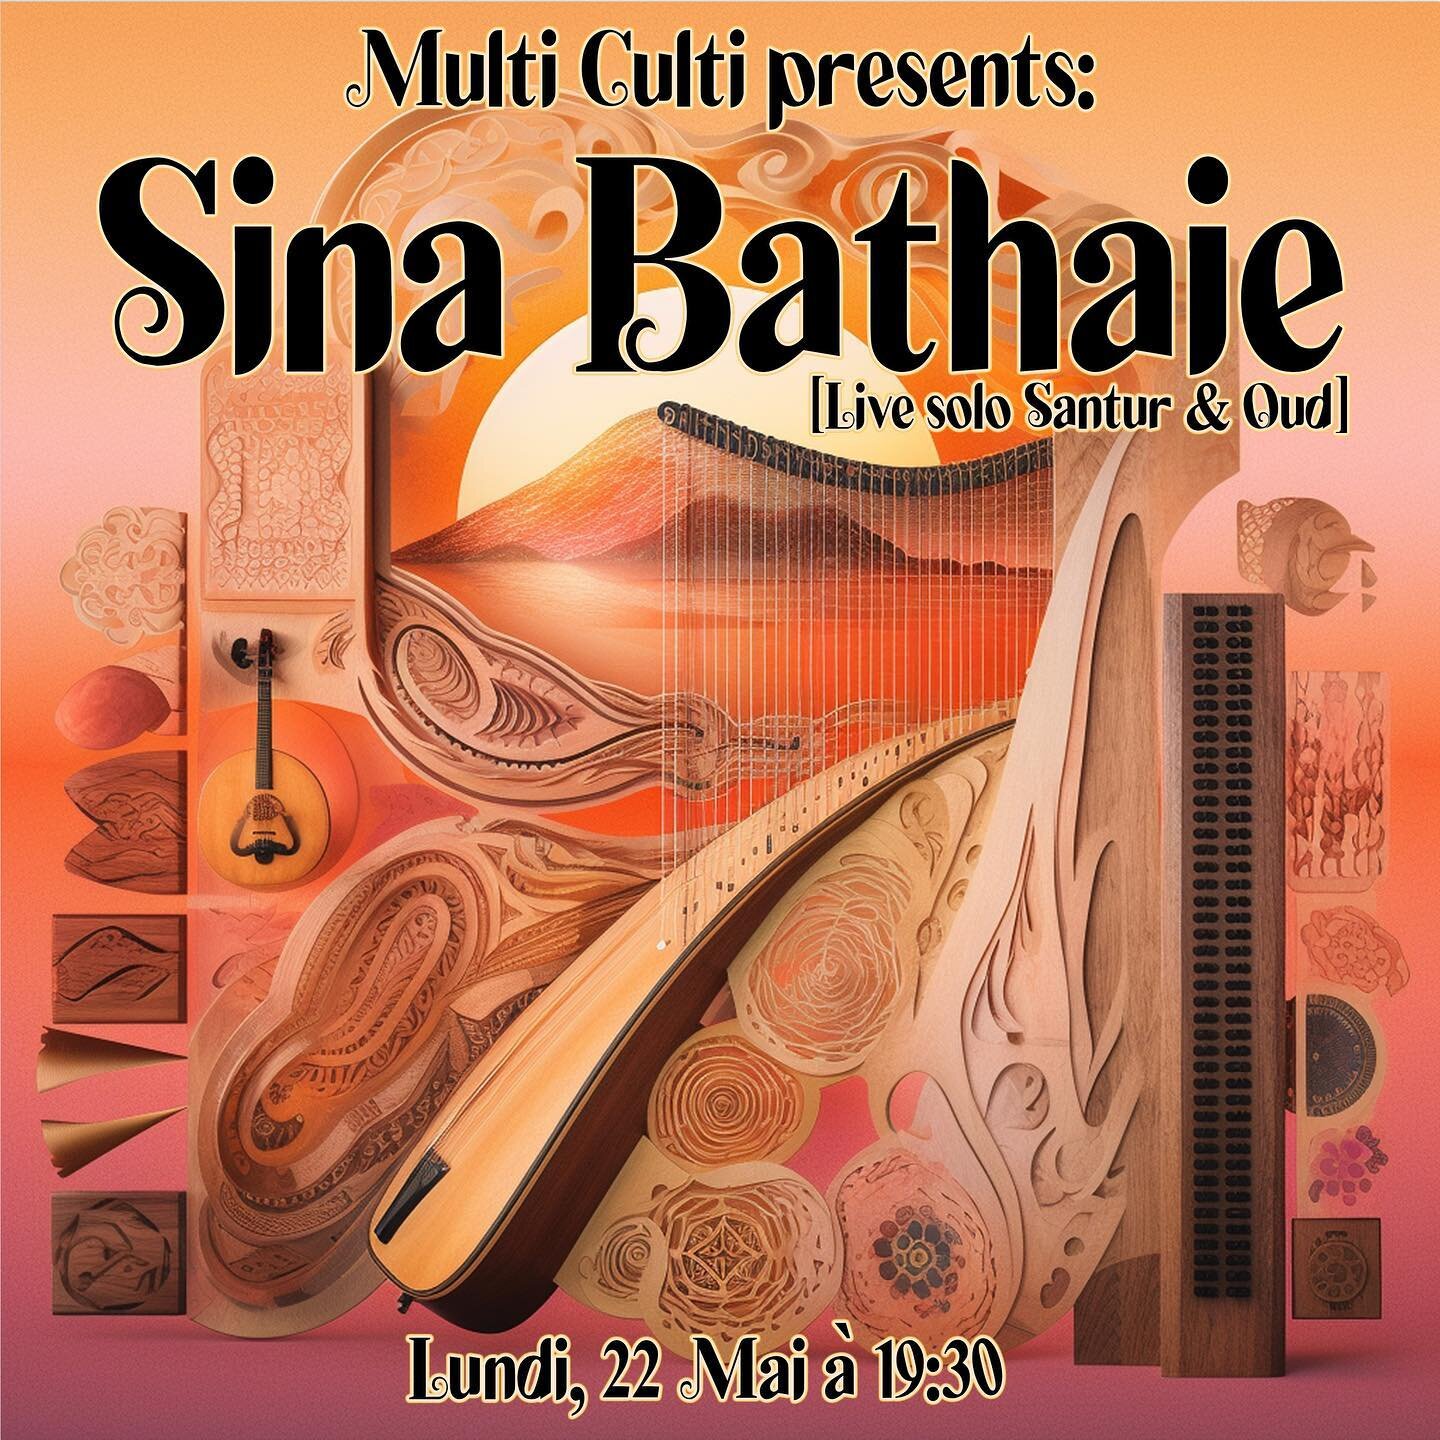 How to finish this beautiful long weekend ☀️🎶
Sina Bathaie, live solo Santur &amp; Oud, presented by Multi Culti
Intimate set up, limited space
DM for info